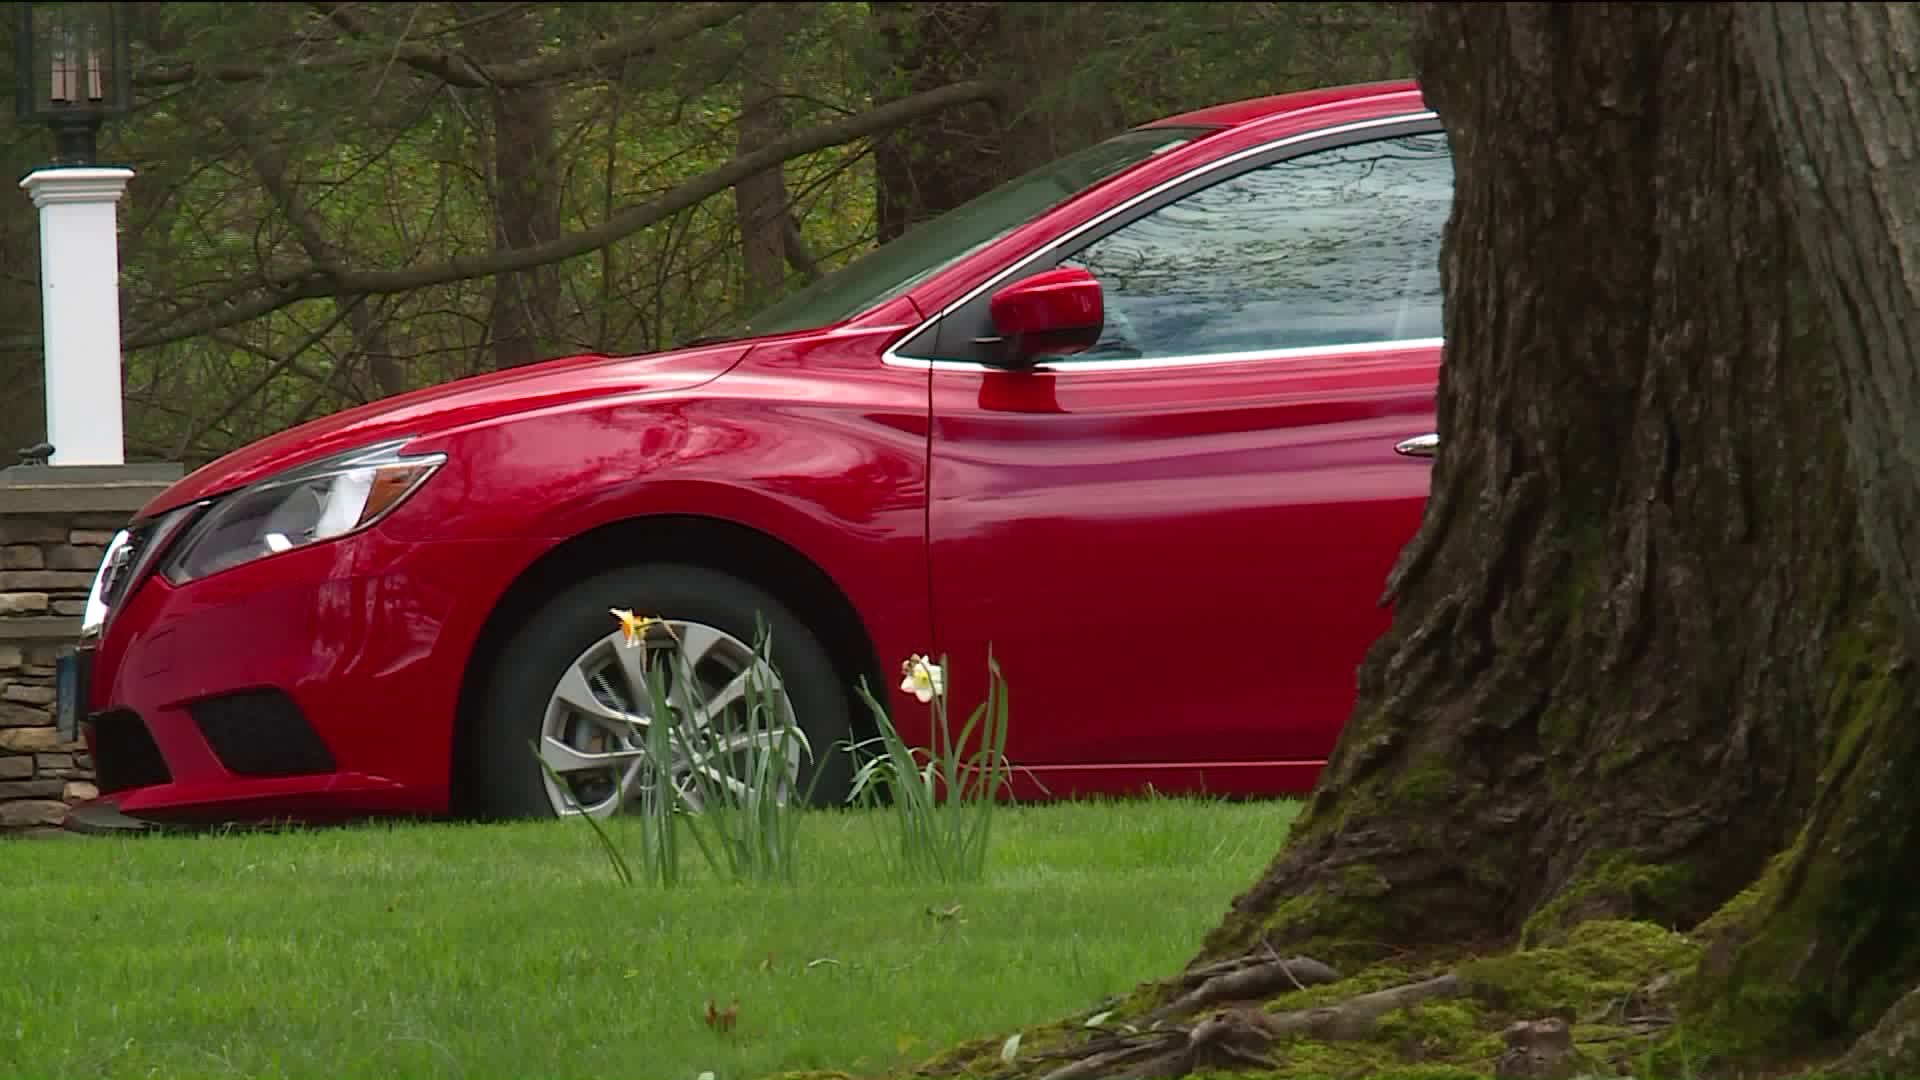 Avon residents concerned with car thefts